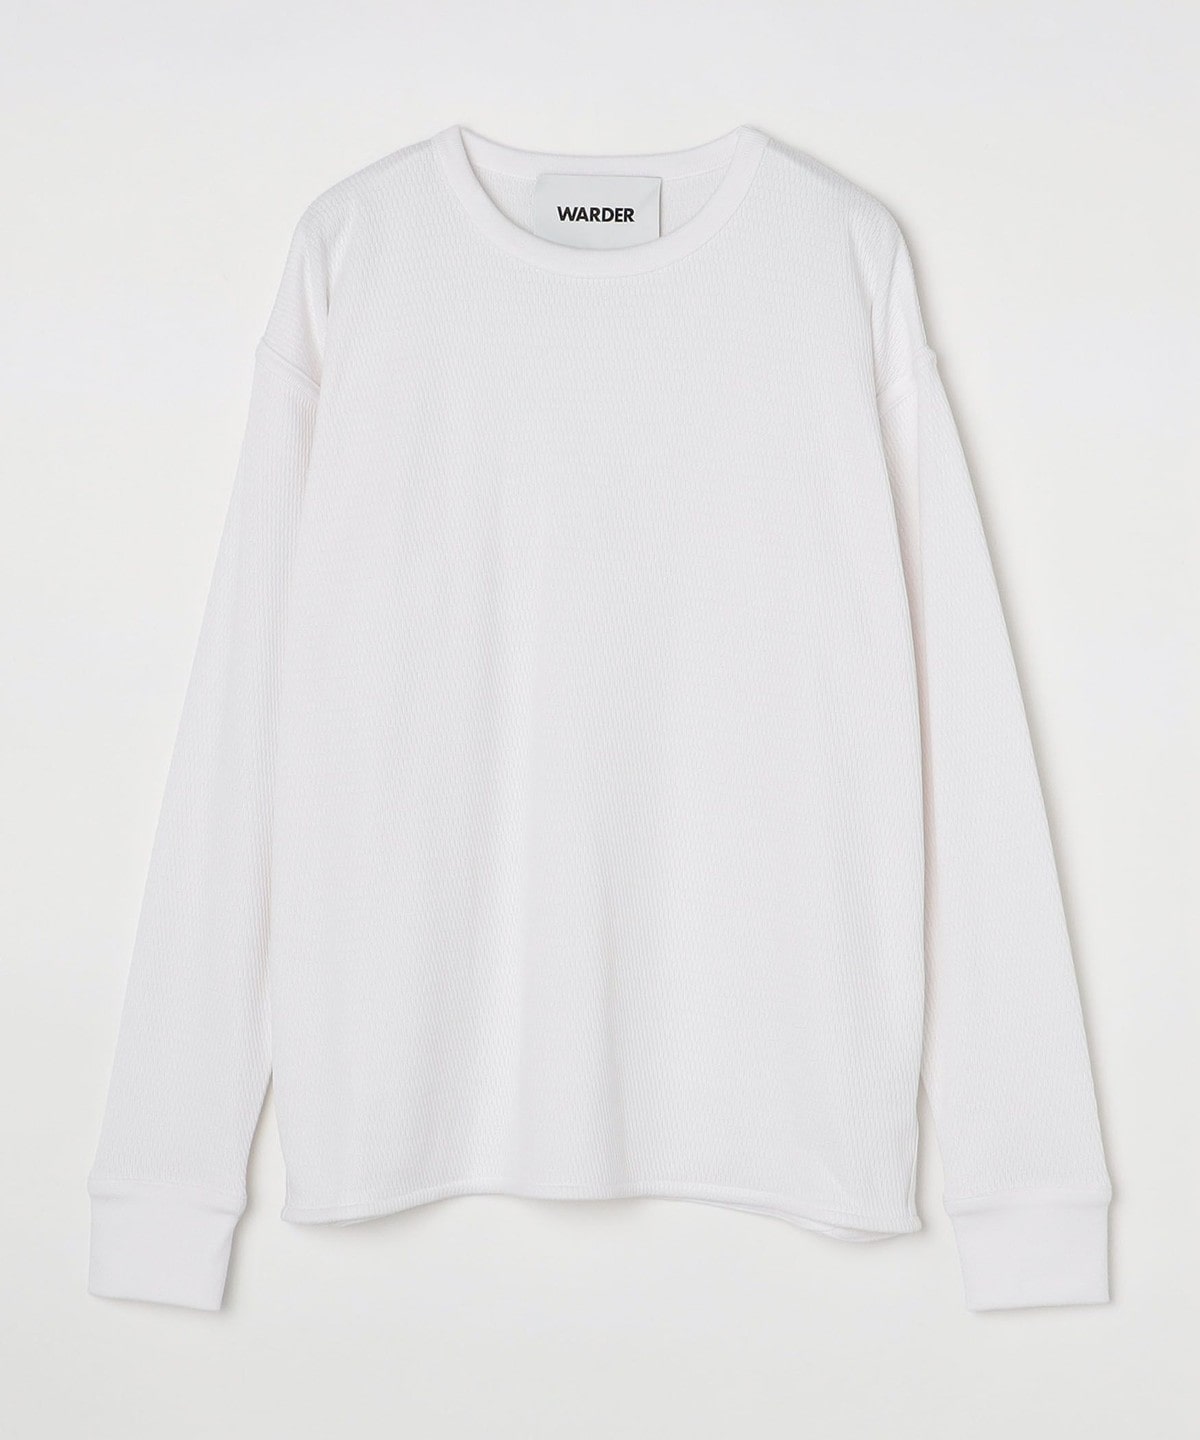 WARDER: FINX THERMAL L/S ホワイト